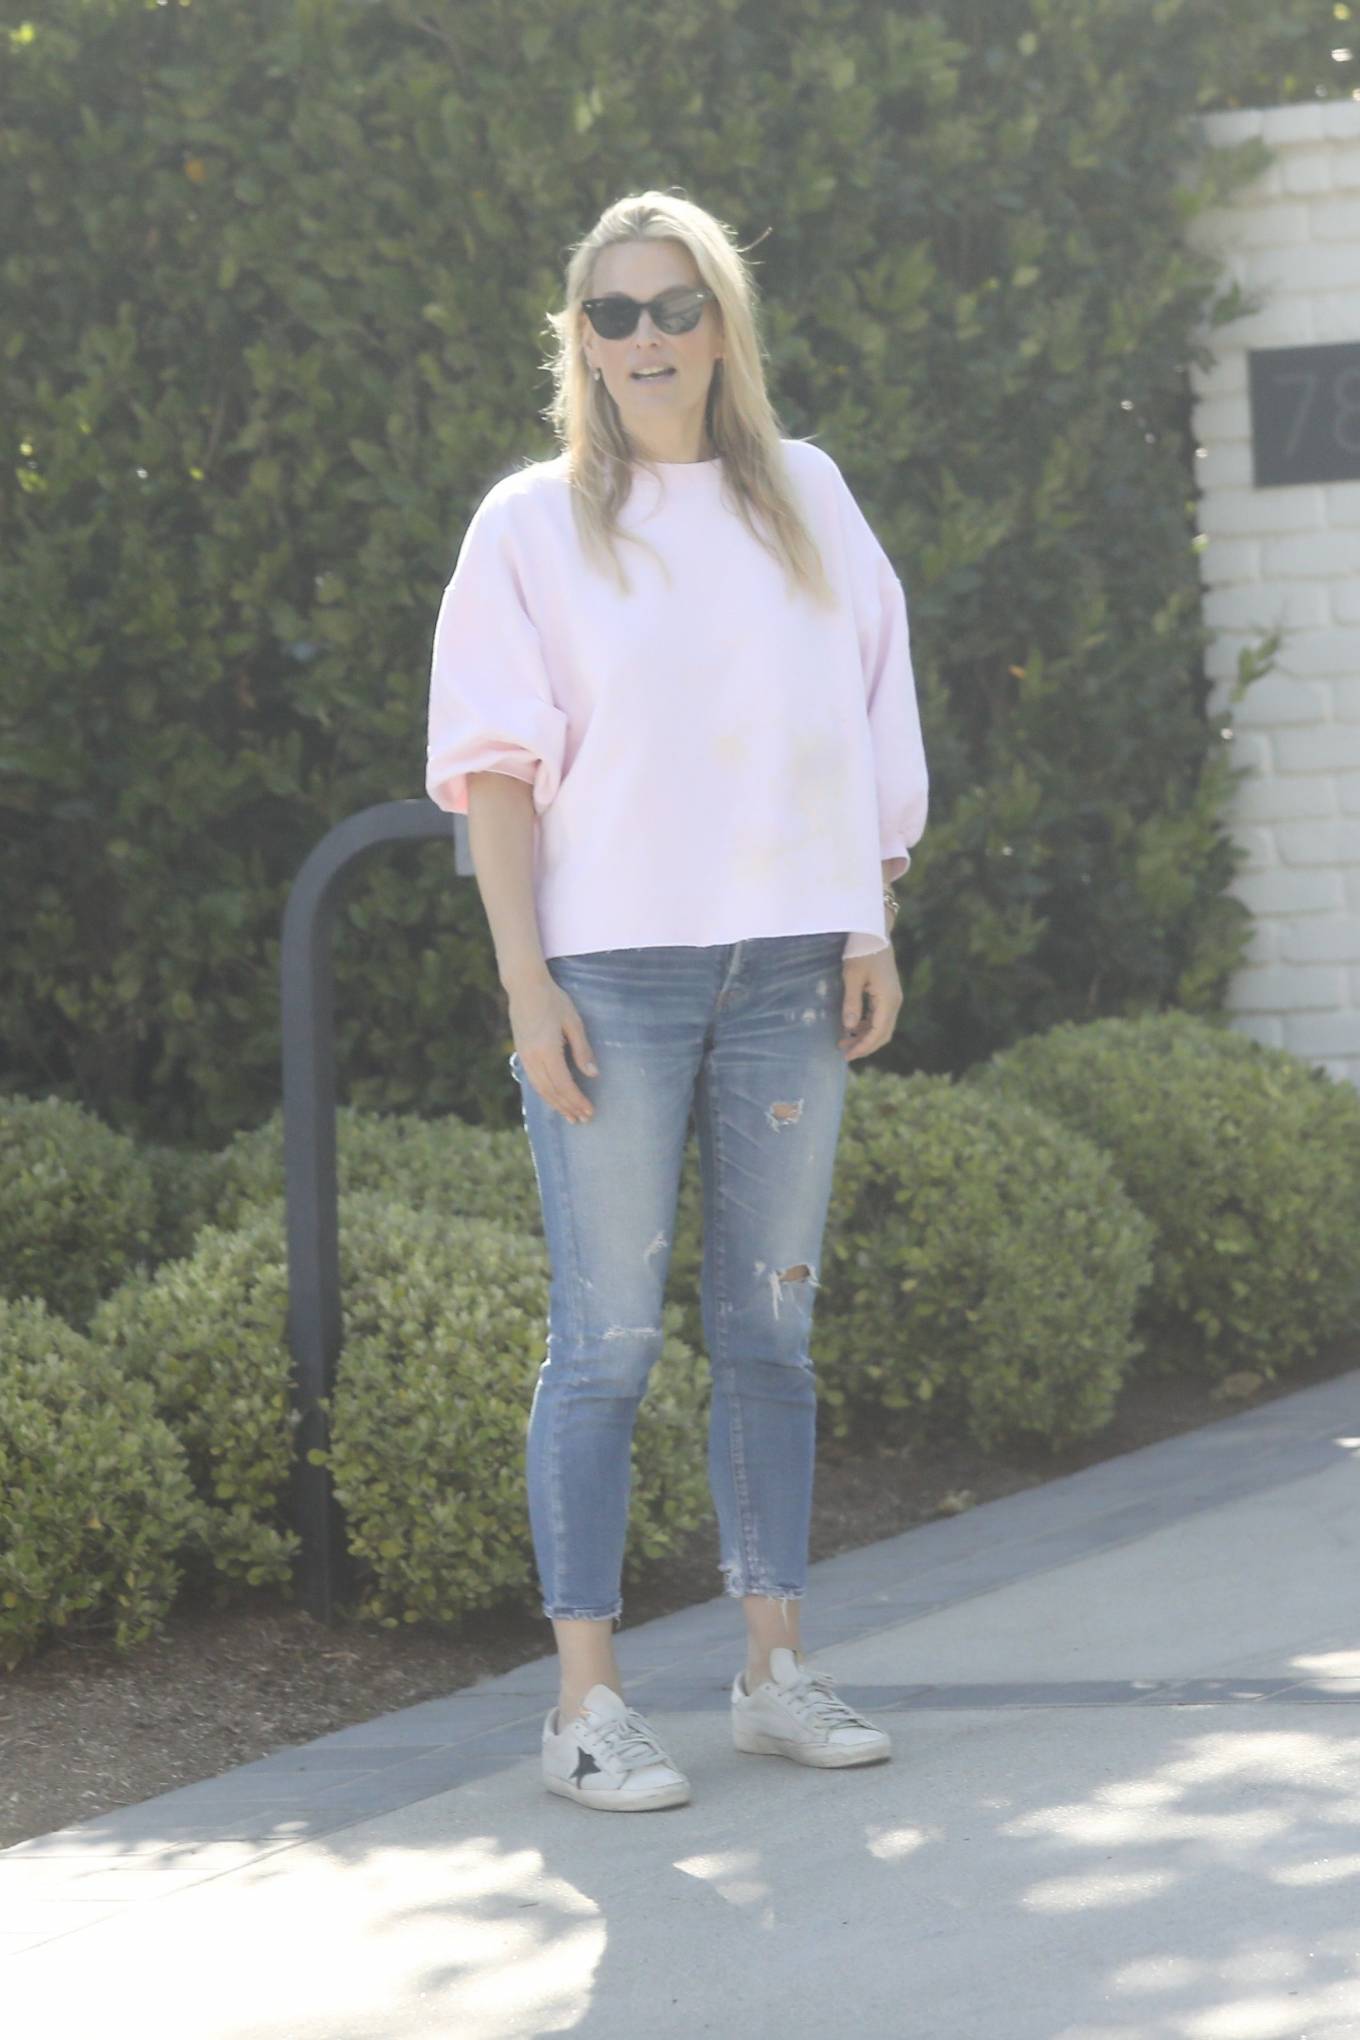 Molly Sims â€“ Pictured at her home